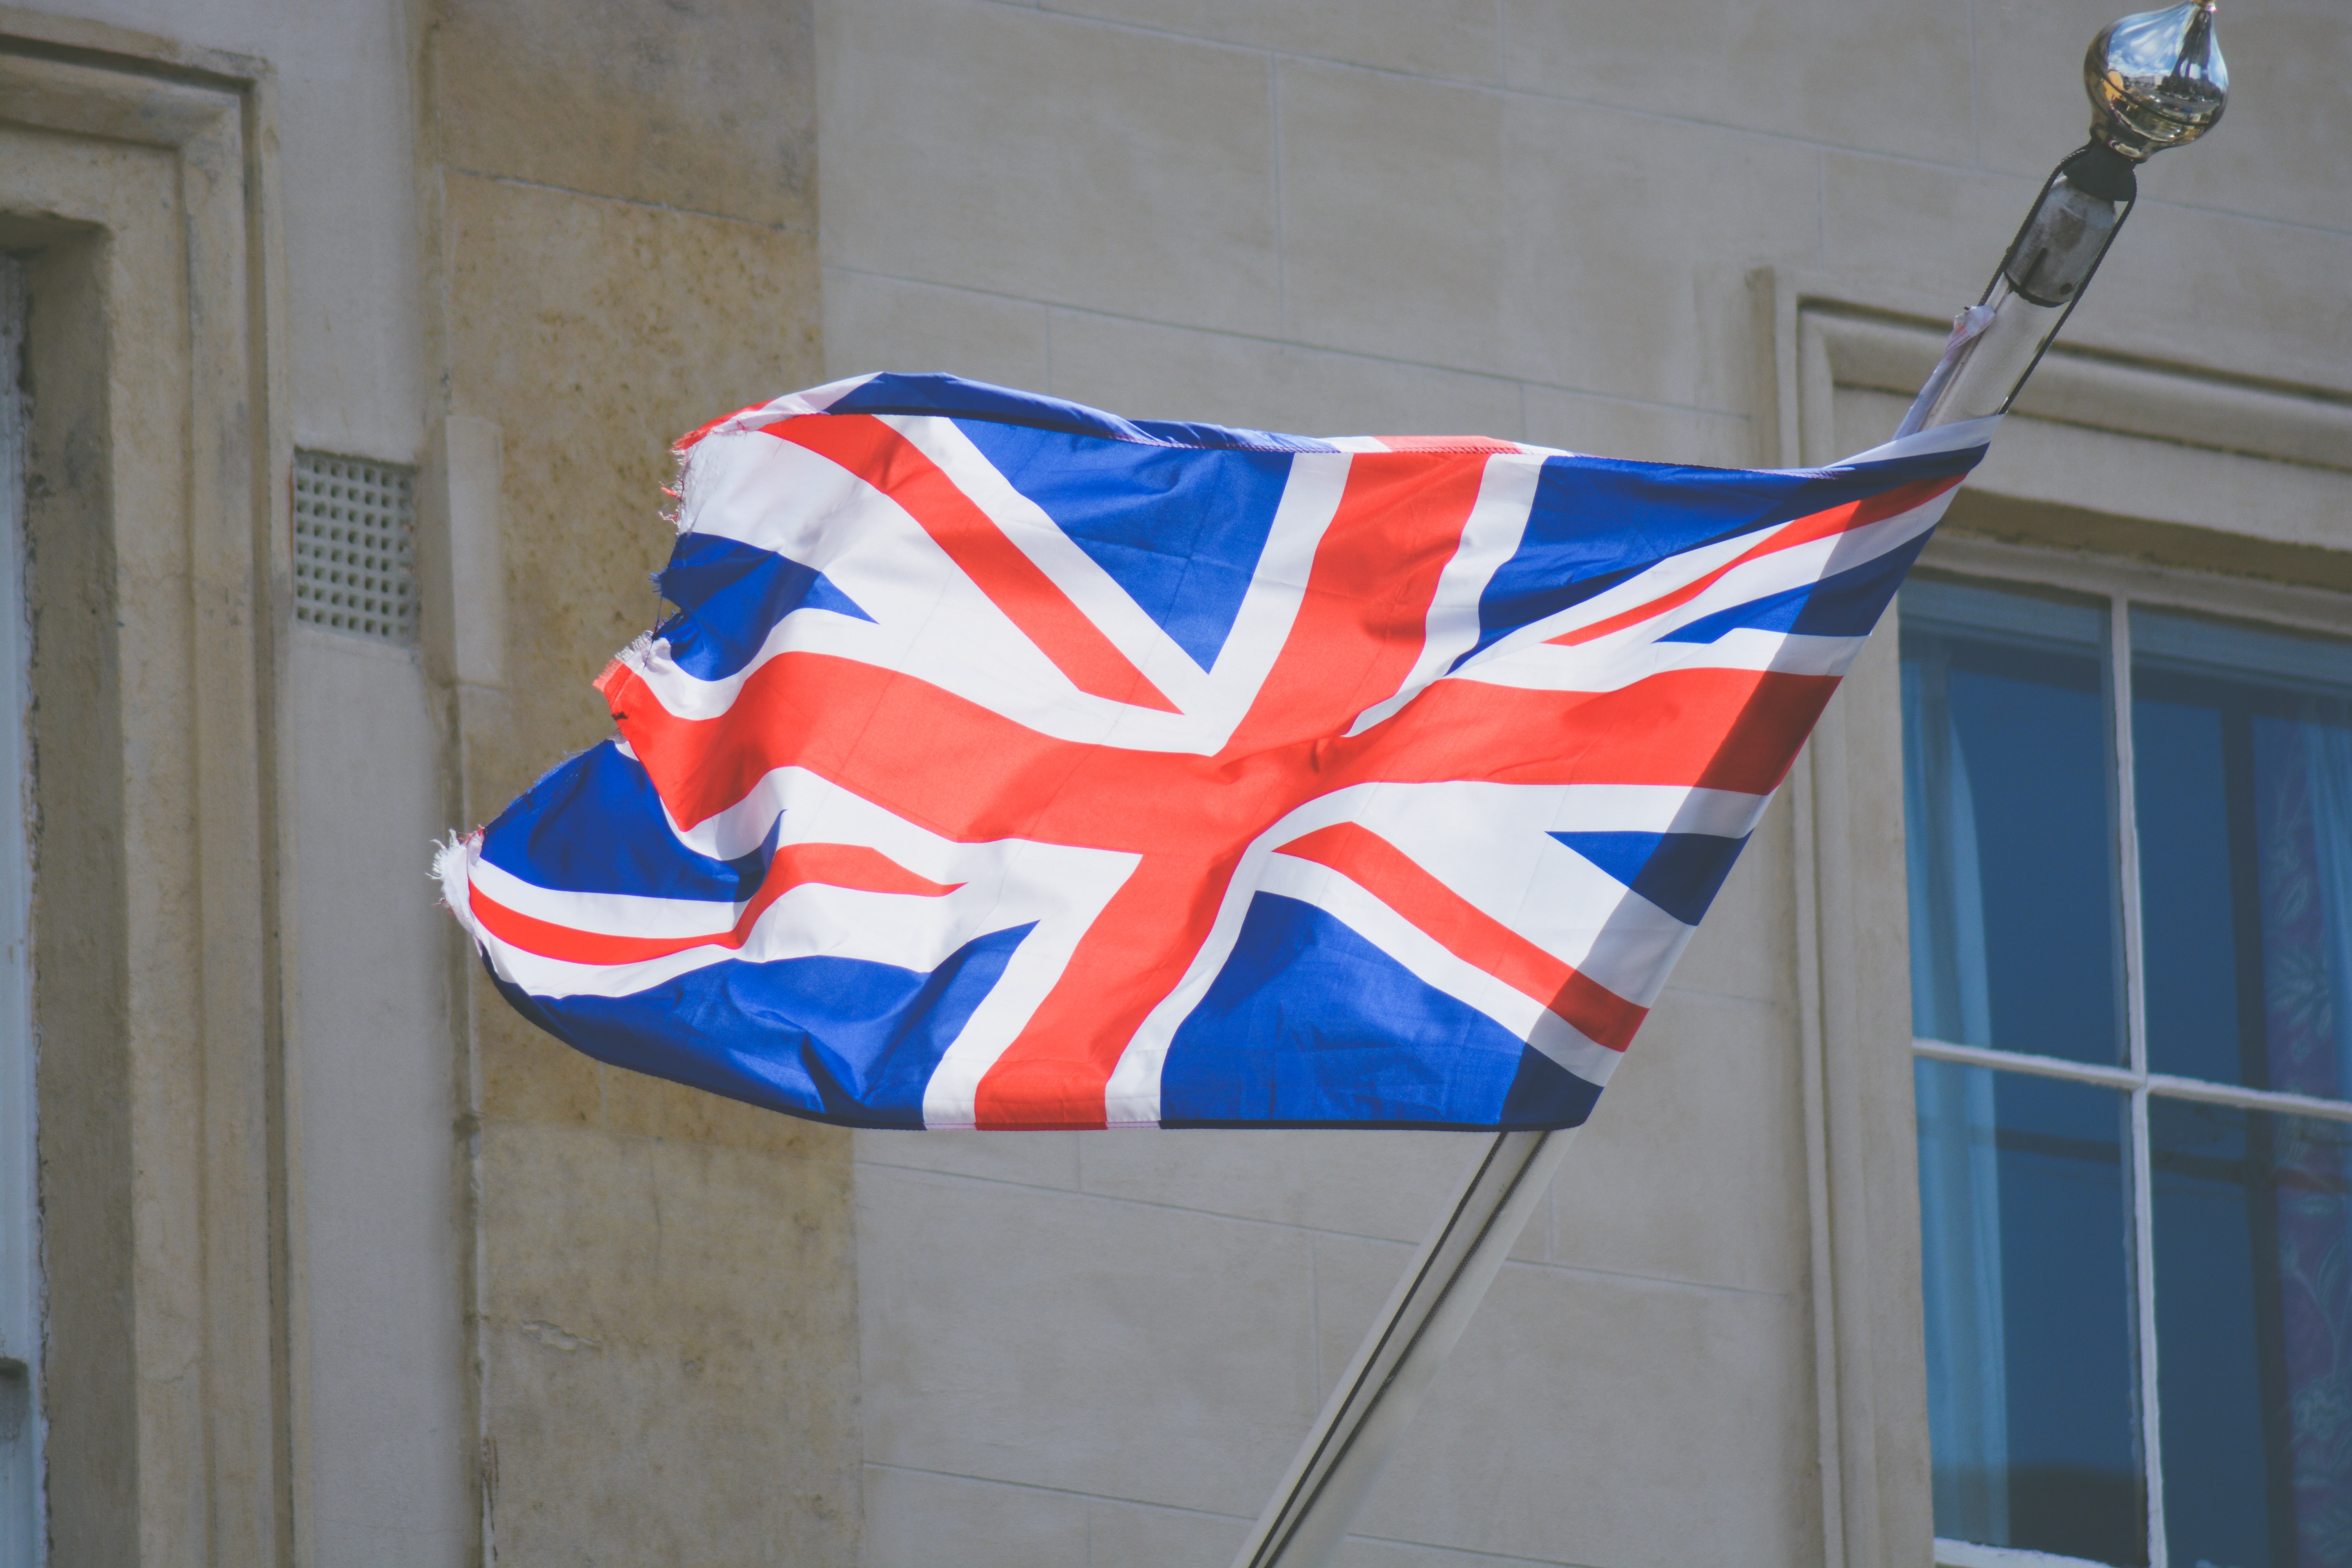 Soft Brexit provides for creation of comparable UK trademarks and designs